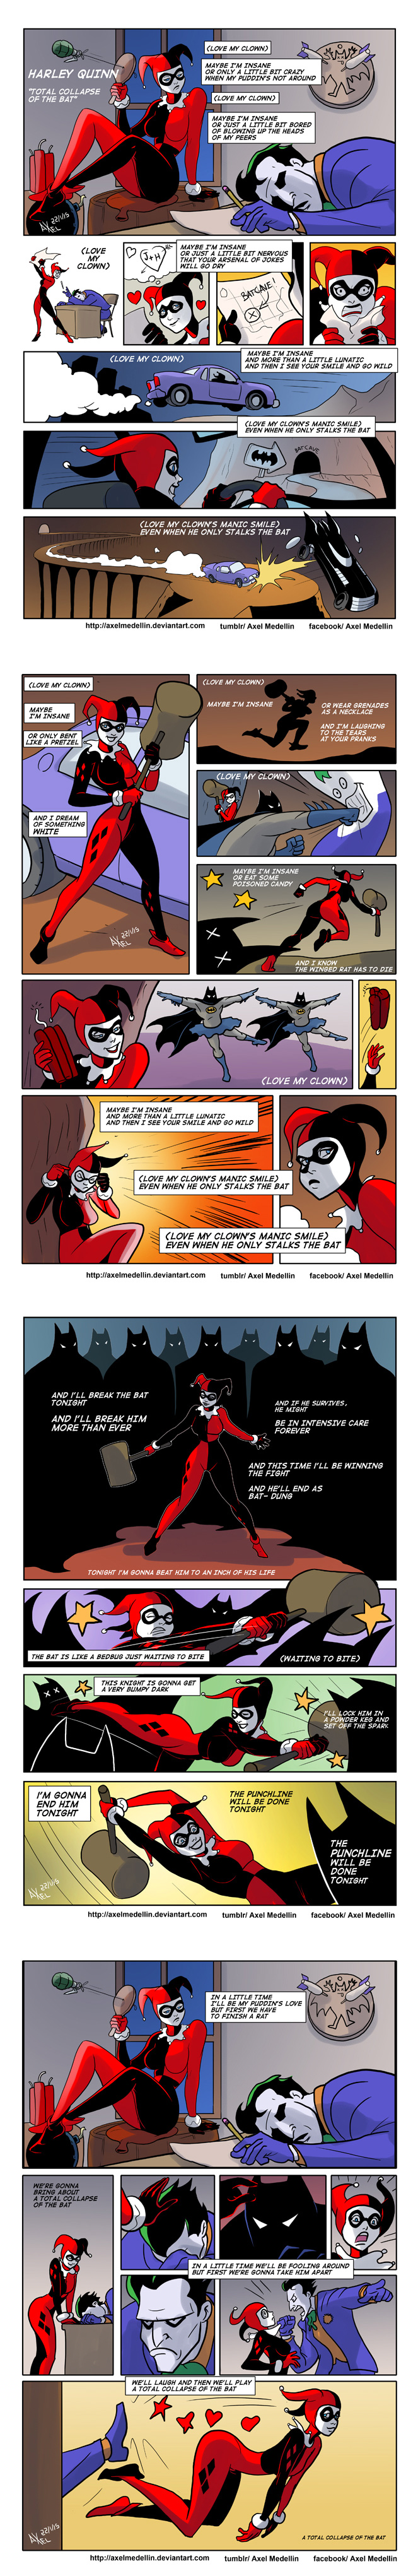 Harley Quinn Total Collapse of the Bat Comic